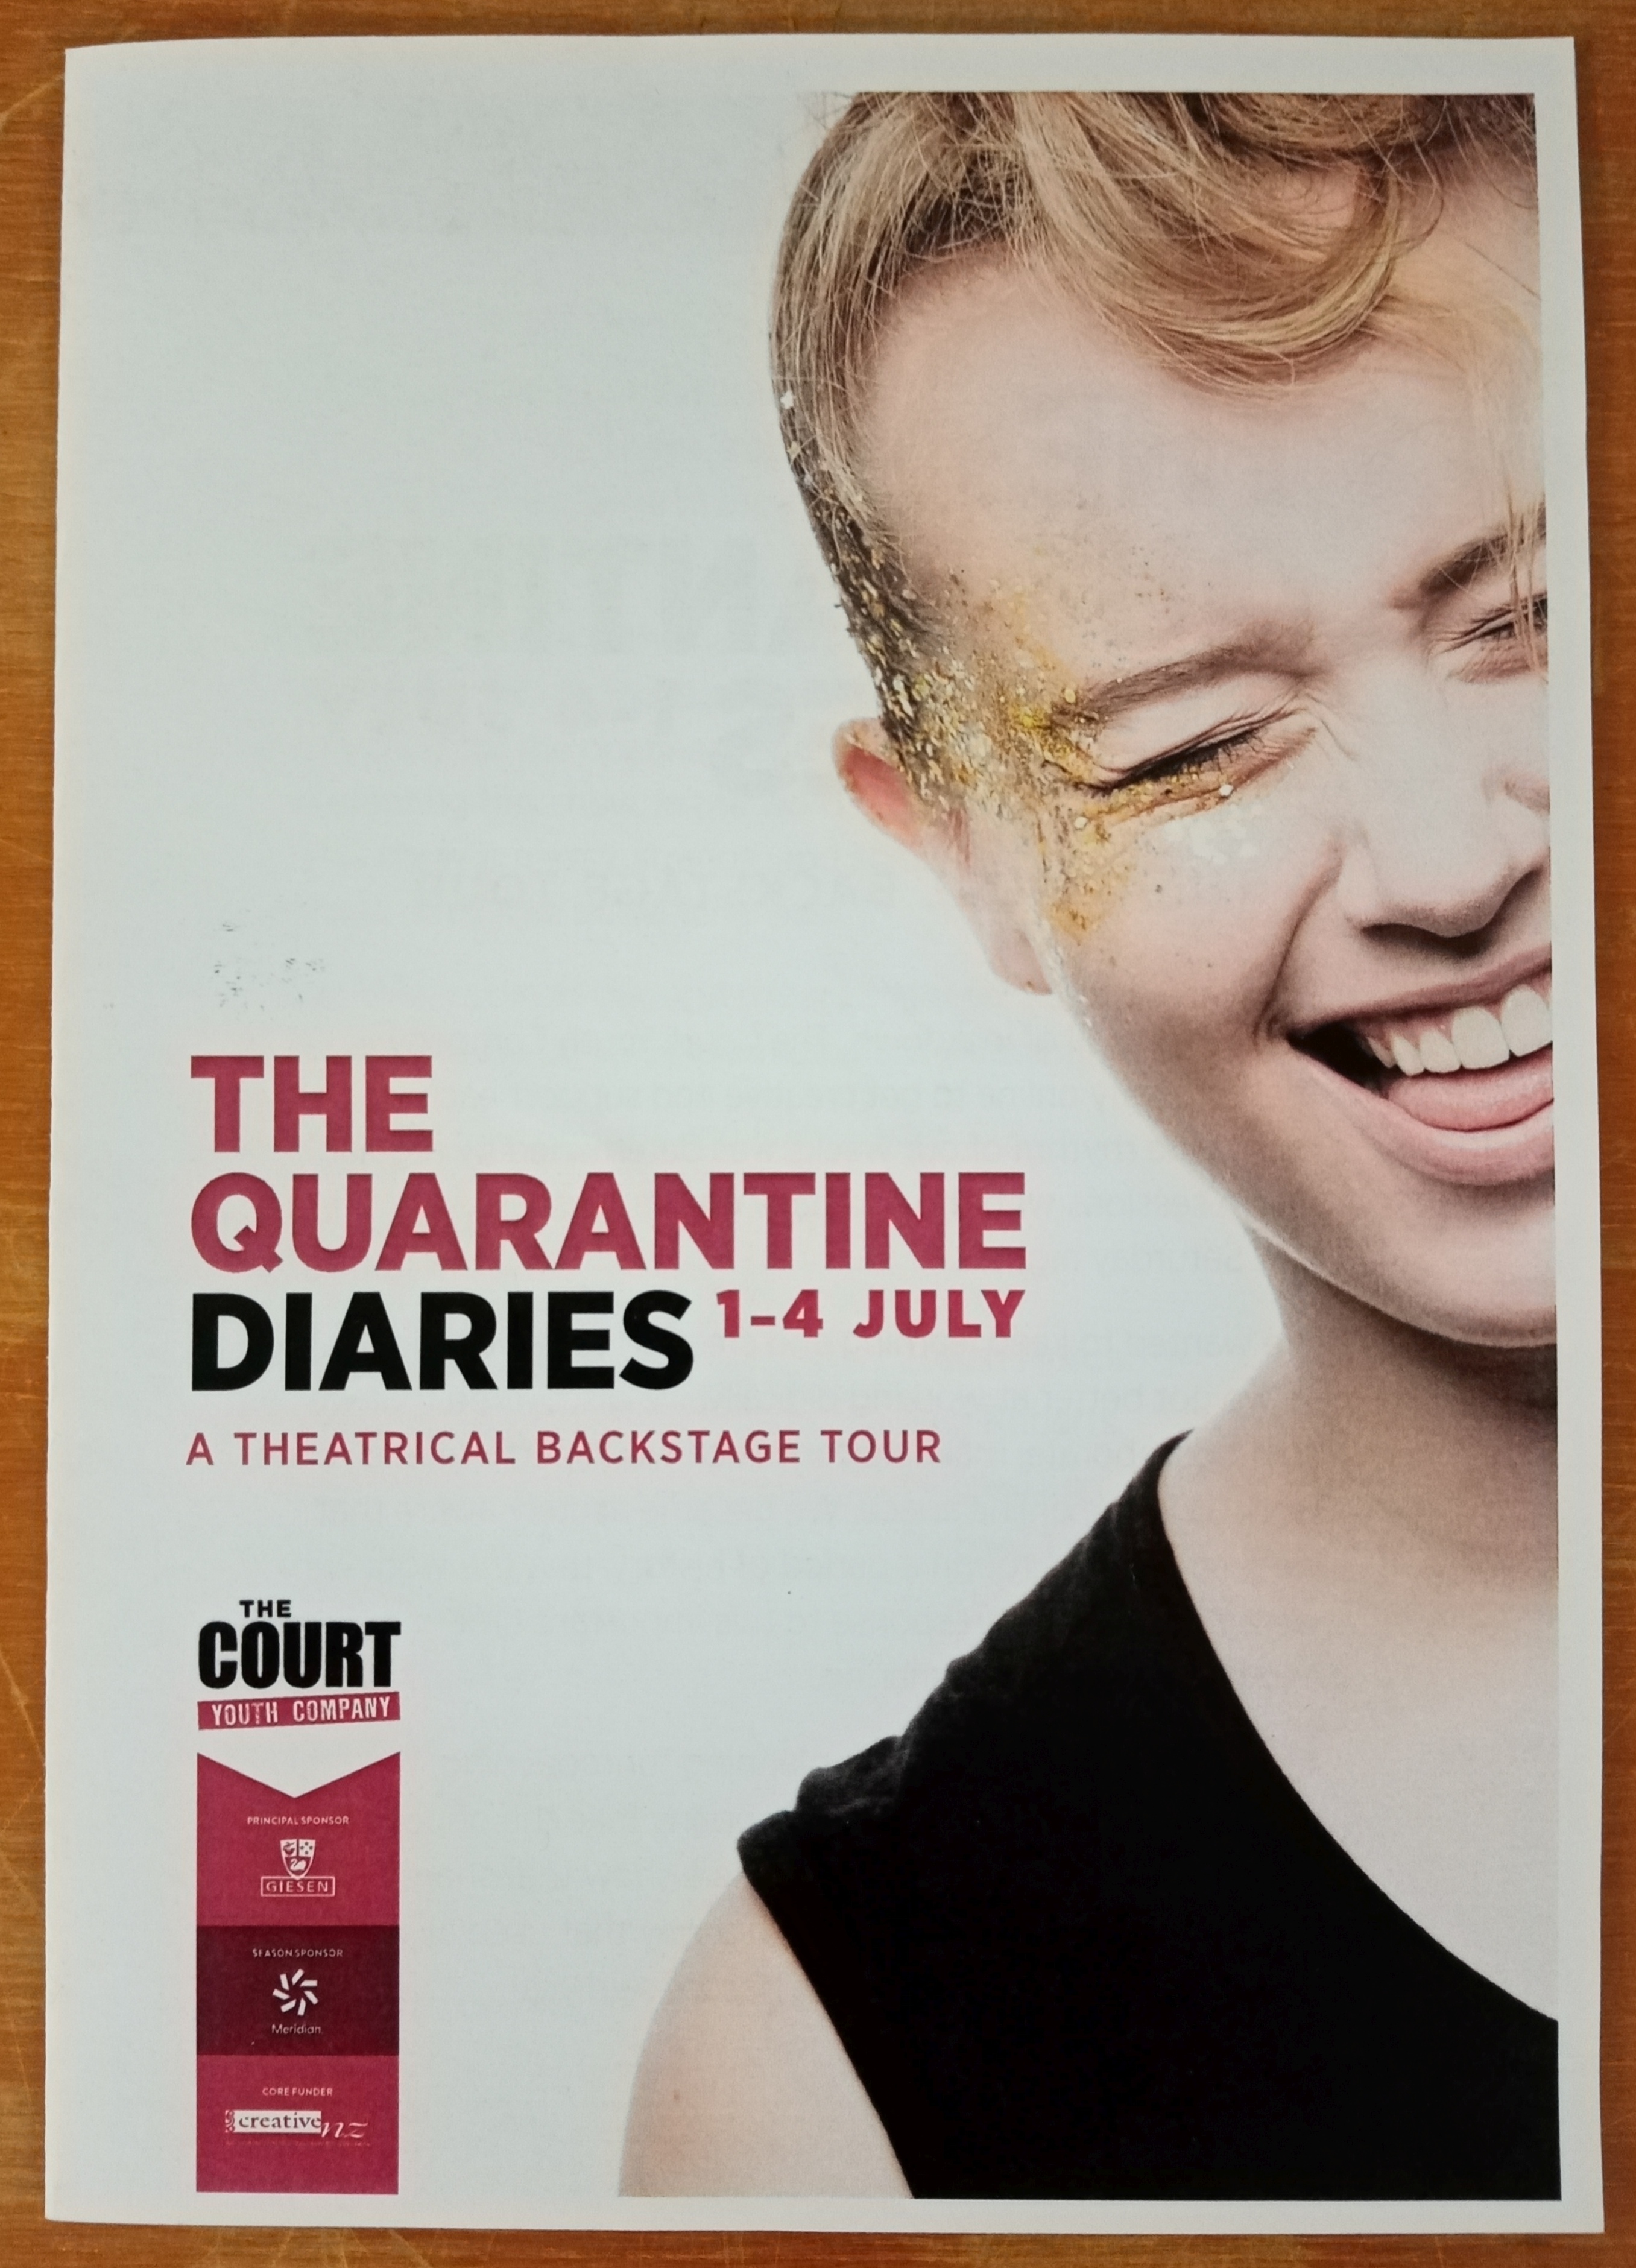 Programme for 'The Quarantine Diaries'. Canterbury Museum 2020.132.1 © The Court Theatre